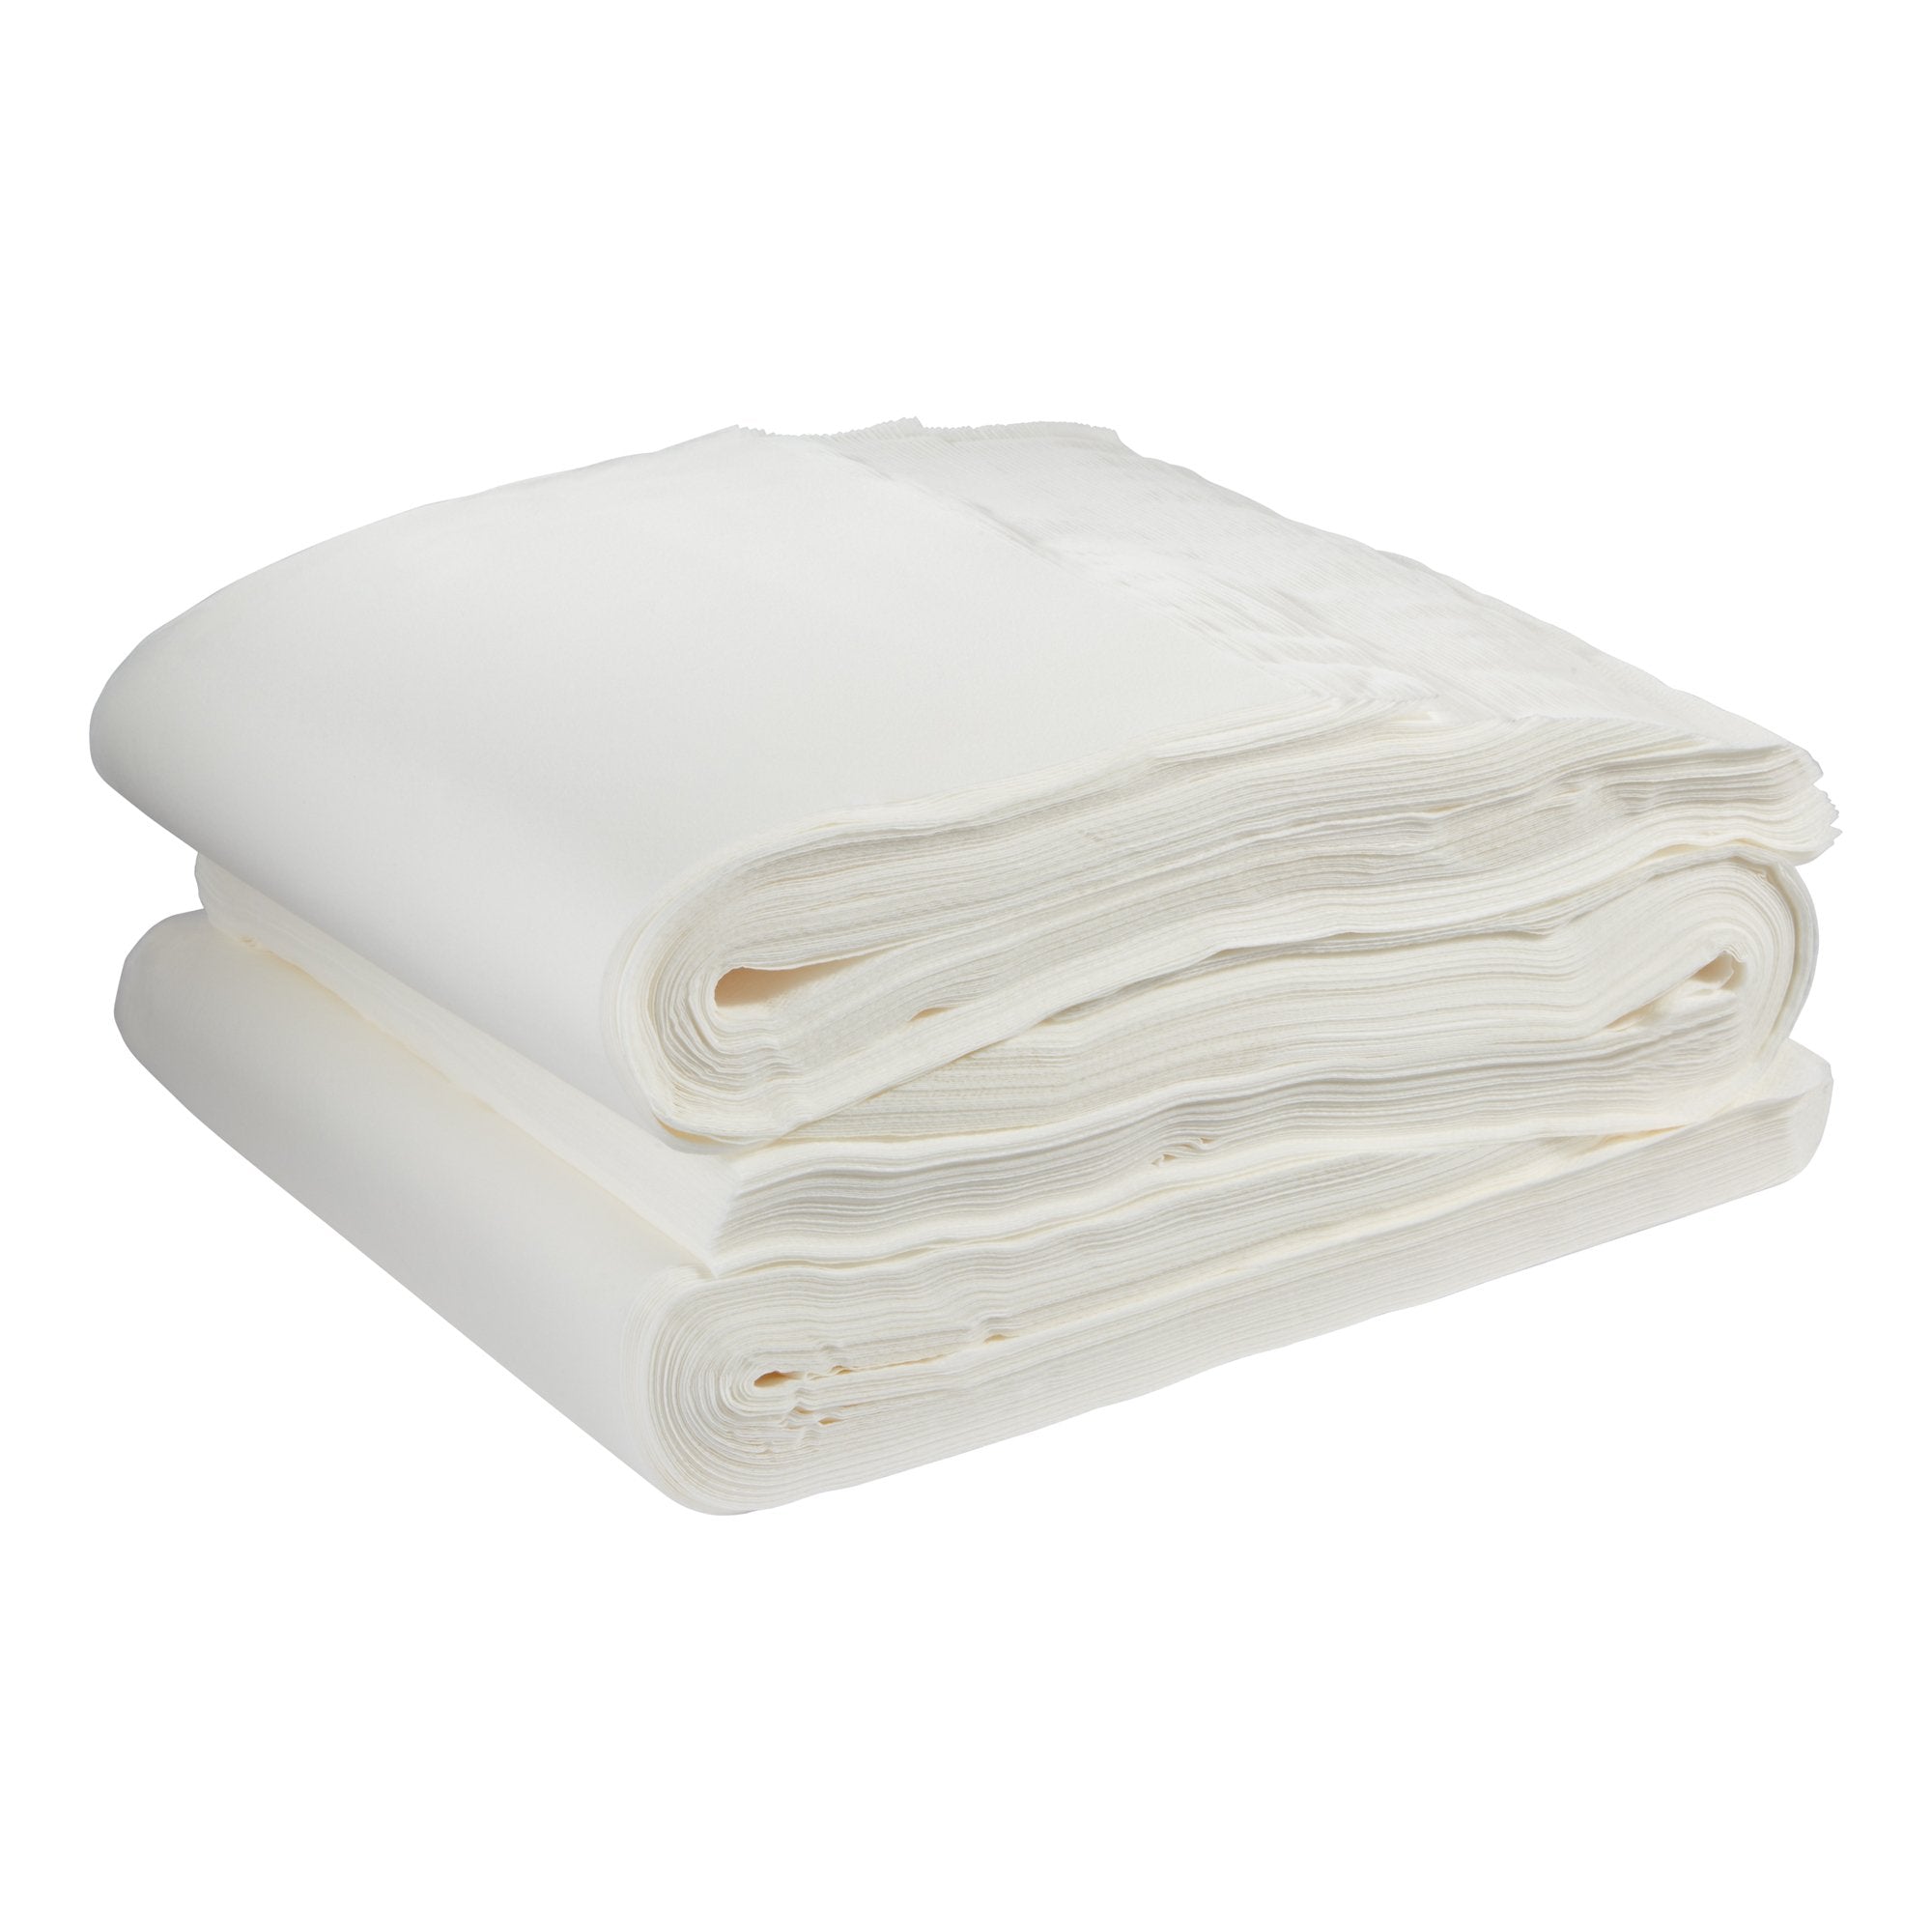 Bath Towel Pacific Blue Select™ A300 19-1/2 X 39 Inch Airlaid Bonded Cellulose White Disposable